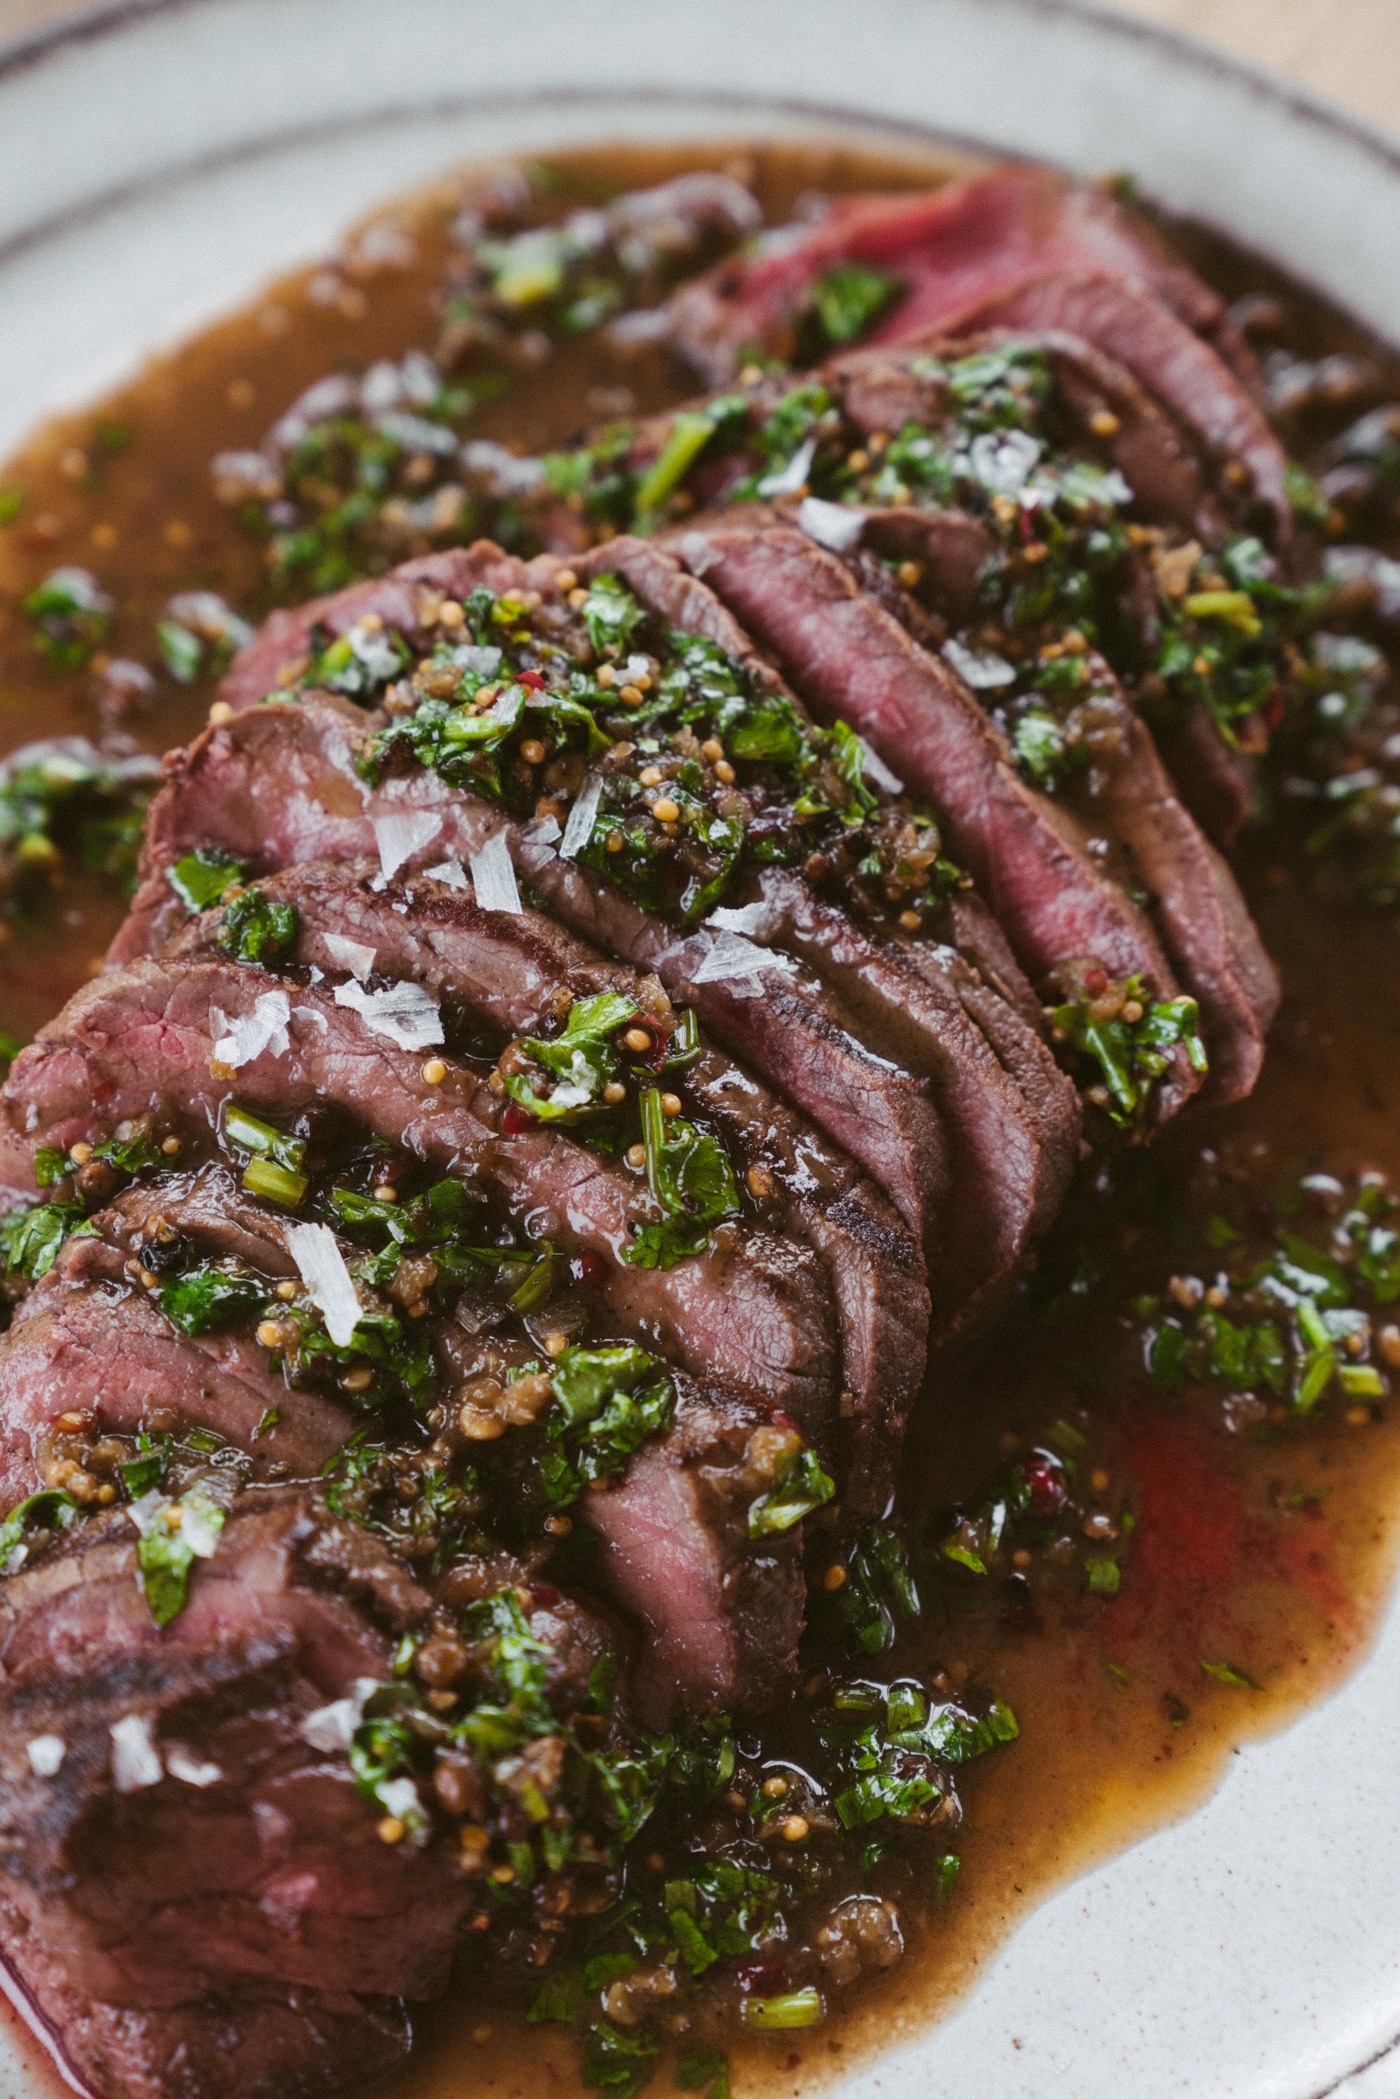 Topside Beef Steak with White Wine, Peppercorn And Coriander Sauce